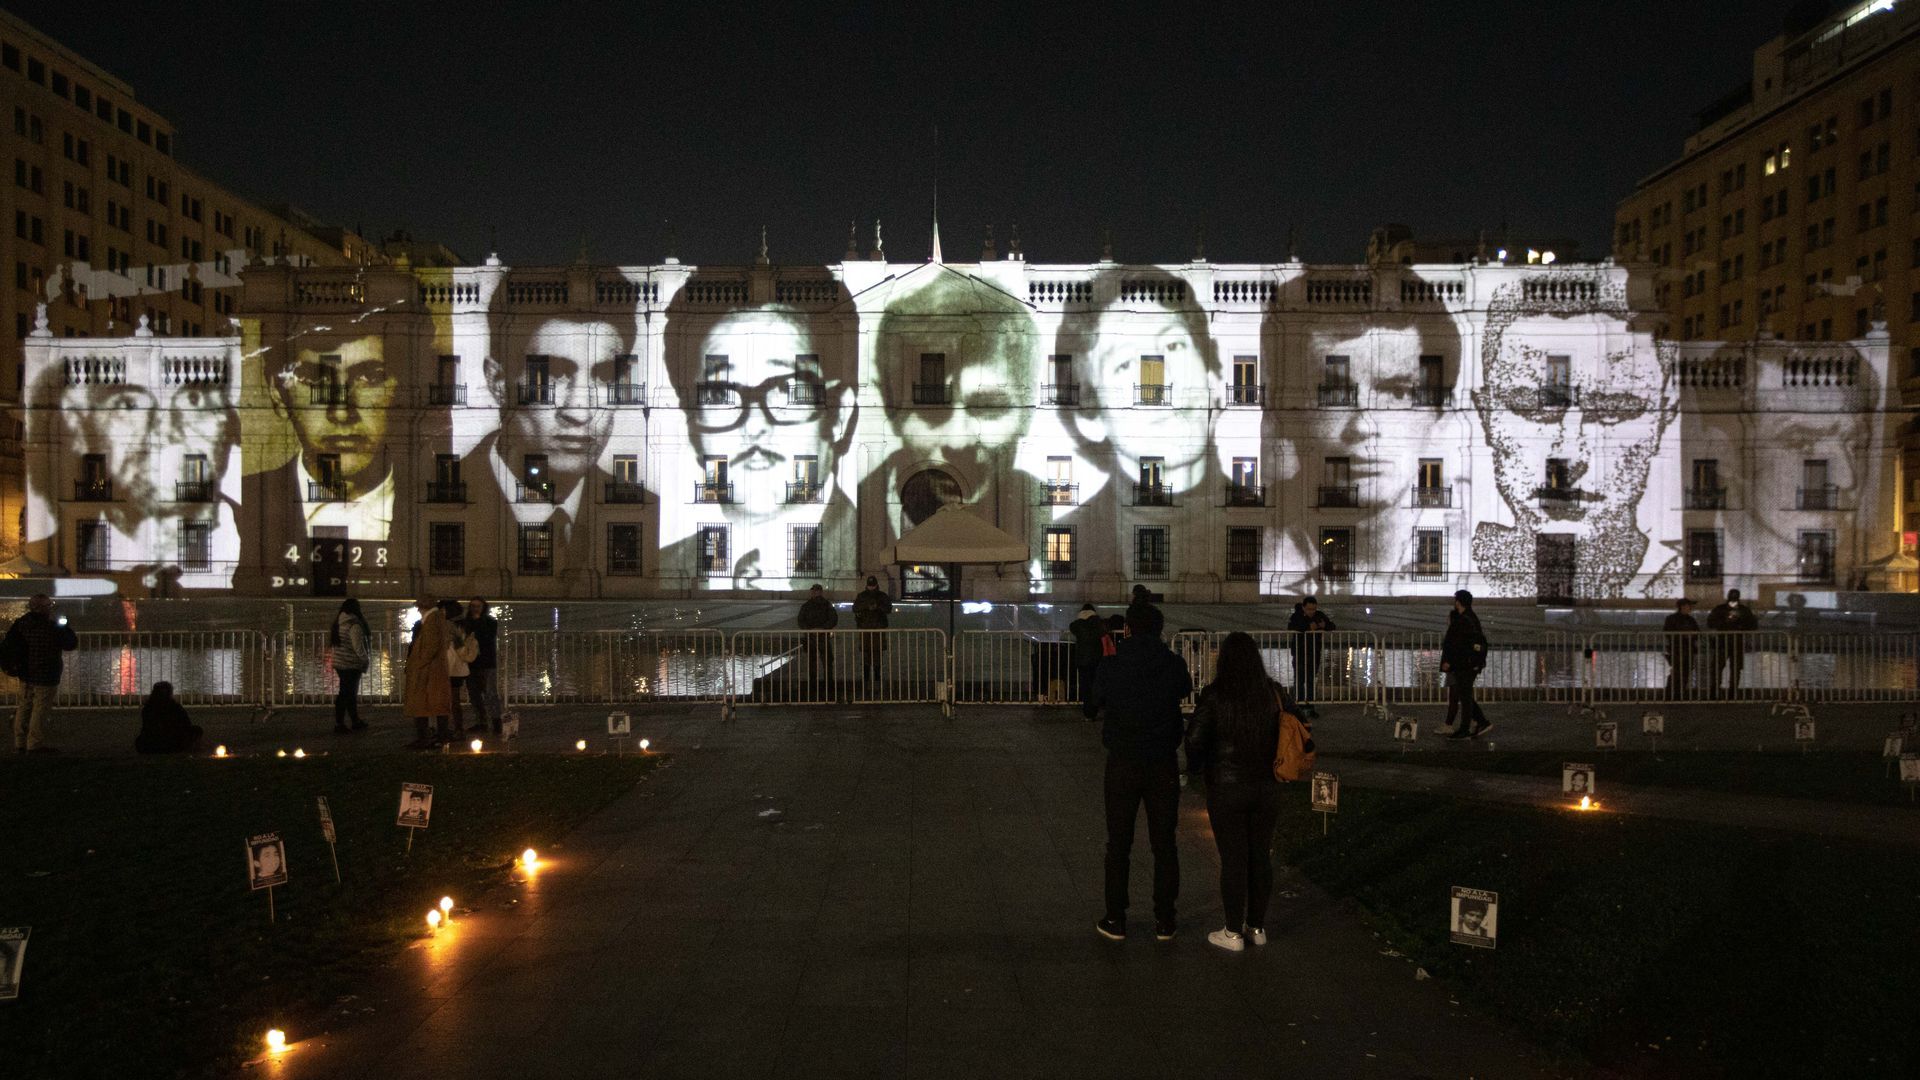 images portraying victims of the Augusto Pinochet dictatorship projected onto the Palacio de La Moneda to mark the commemoration of the International Day of the Disappeared in Santiago, Chile, on Aug. 30. Photo: Lucas Aguayo Araos/Anadolu Agency via Getty Images